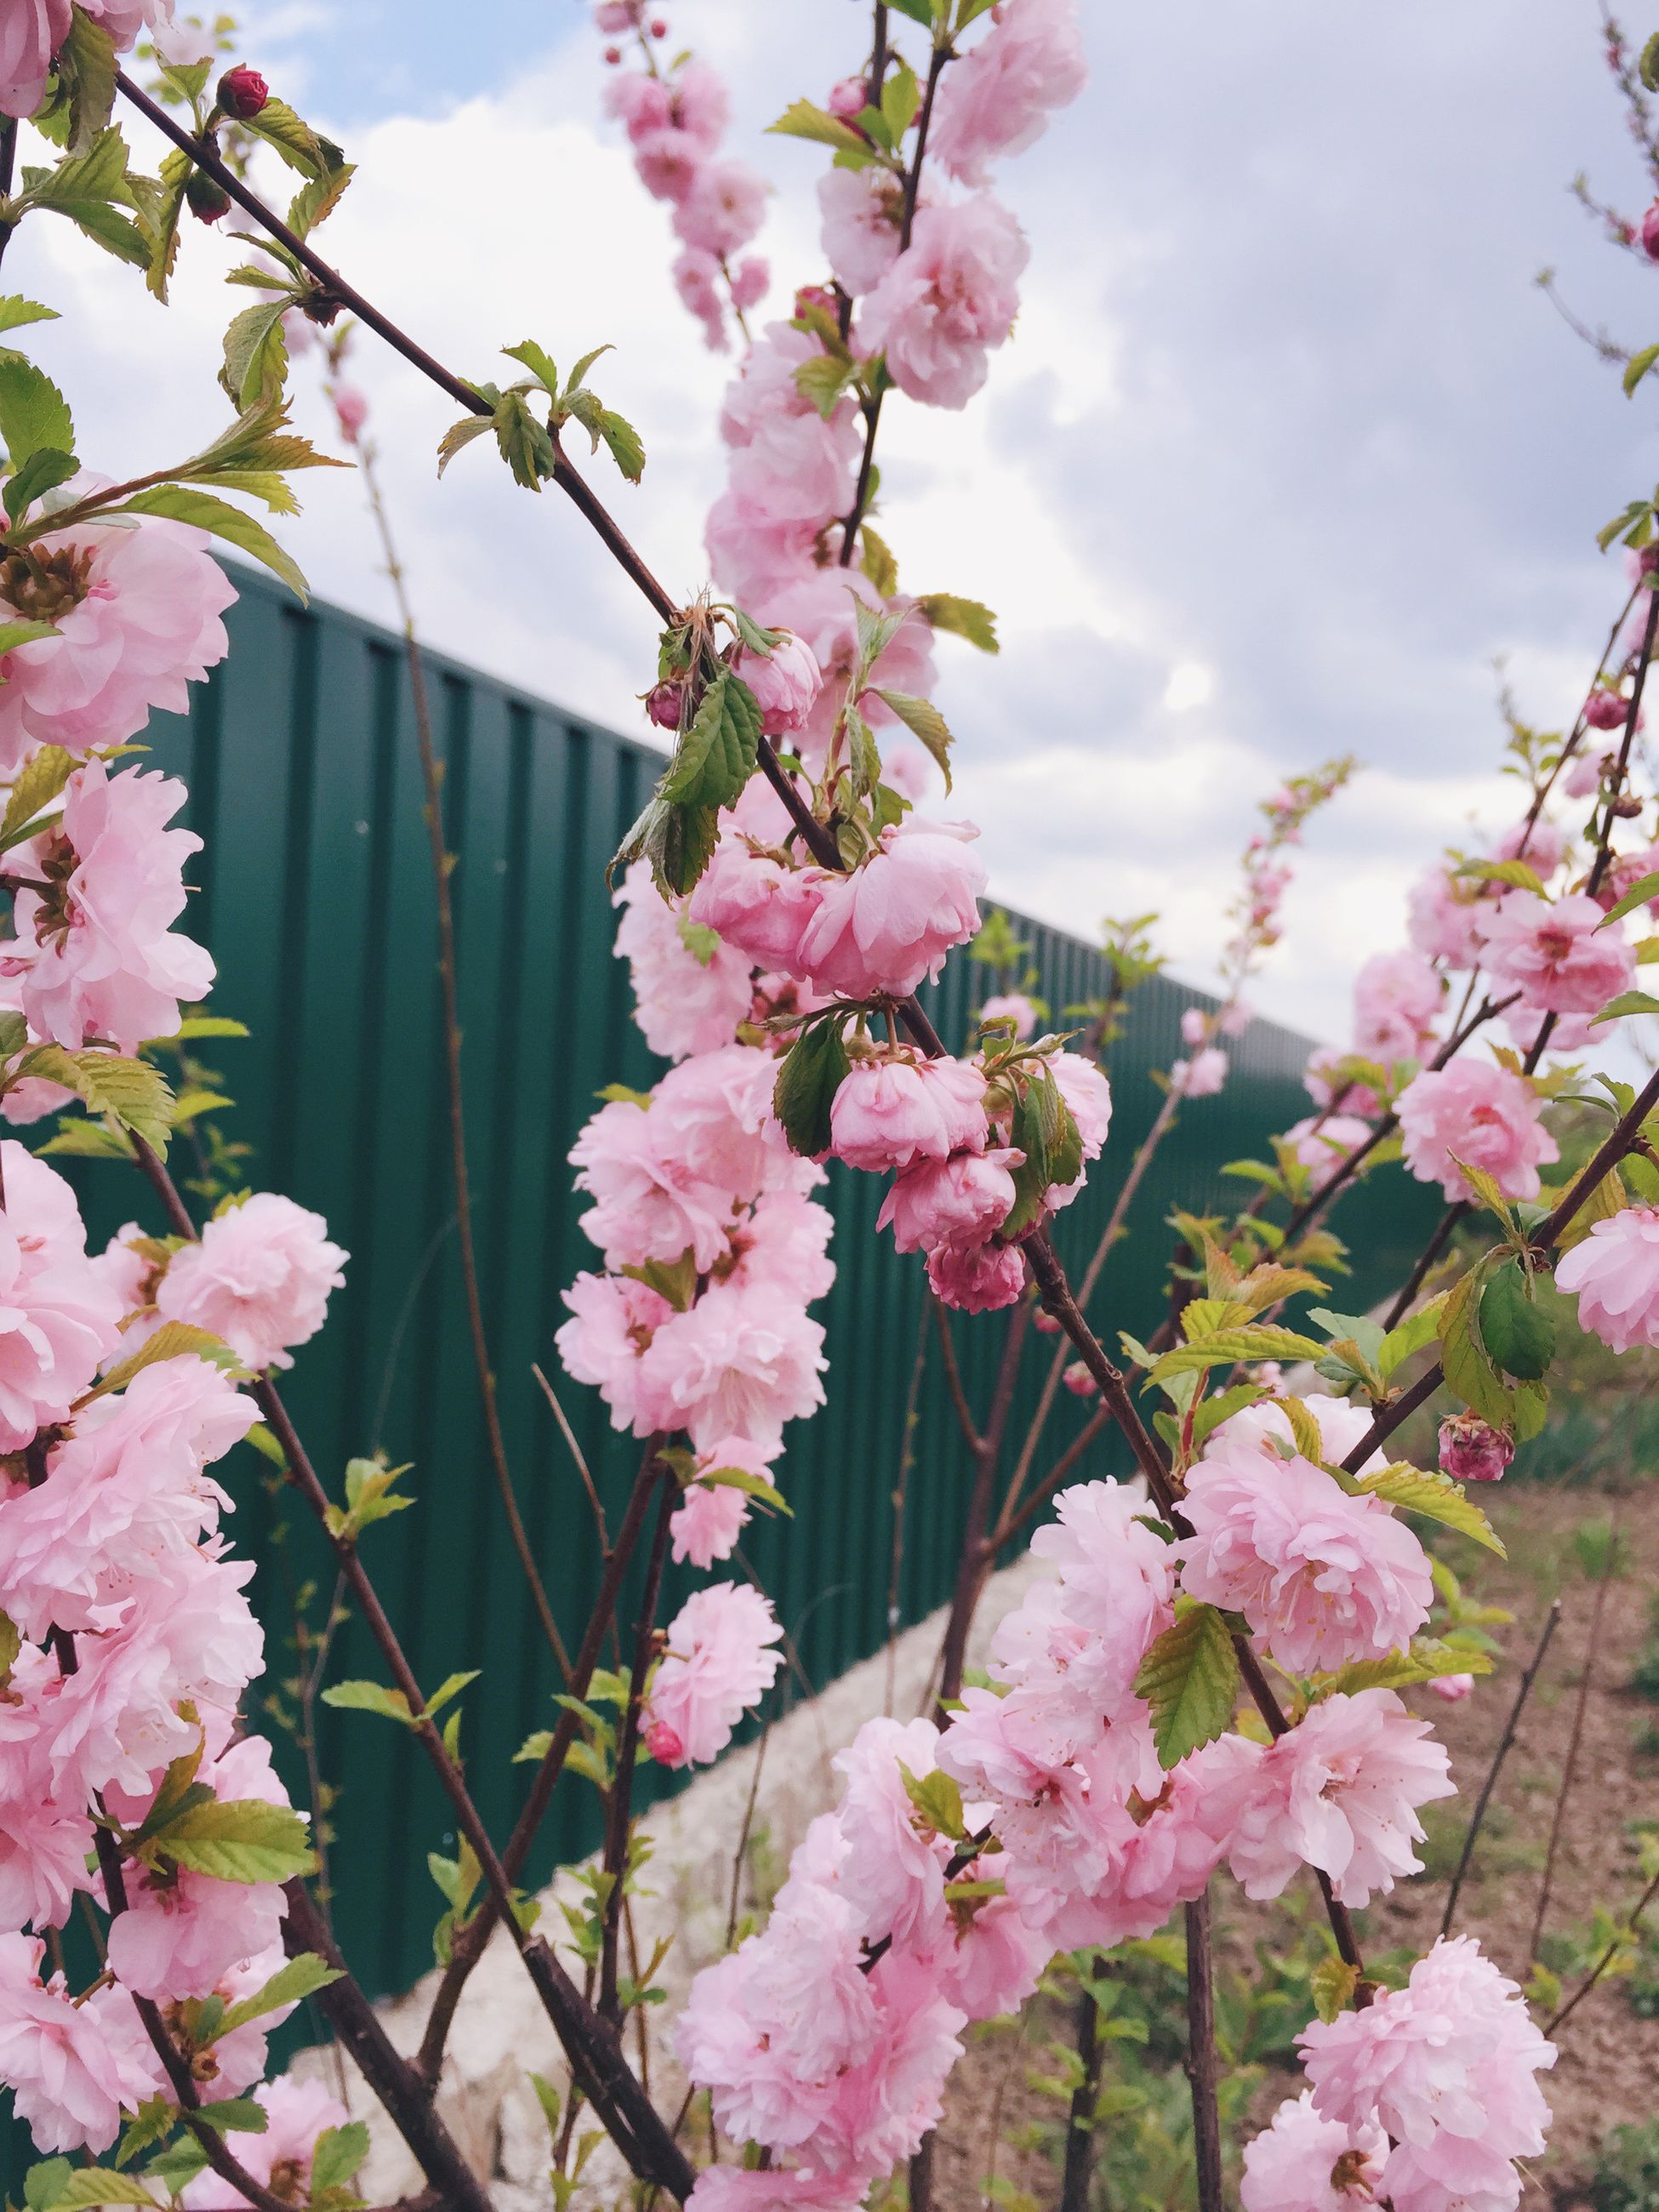 flower, freshness, pink color, branch, fragility, growth, tree, cherry blossom, blossom, cherry tree, beauty in nature, nature, low angle view, pink, sky, in bloom, springtime, fruit tree, twig, blooming